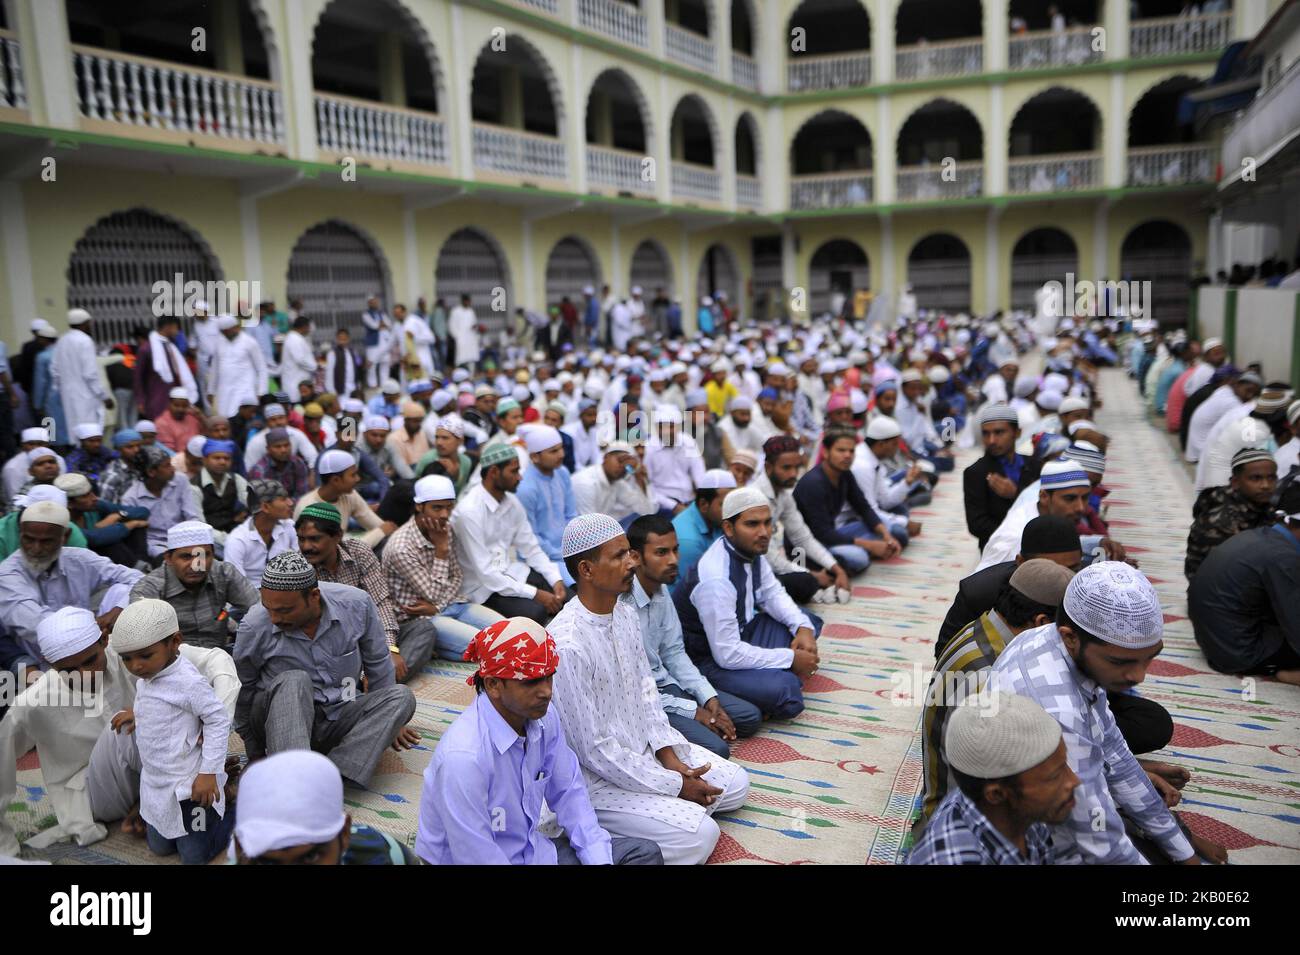 Nepalese Muslim arrive to offer ritual prayer during celebration of Bakra Eid or Eid al-Adha or Id-ul-Azha on Wednesday, August 22, 2018 in Kashmiri Jame Mosque, Kathmandu, Nepal. Bakra Eid, also known Eid al-Adha or Id-ul-Azha in Arabic, is a 'Feast of Sacrifice' and celebrated as the time to give and to sacrifice. Nepalese goverment announced a public holiday on the occasion of Bakra Eid or Eid al-Adha or Id-ul-Azha, one of the two major festivals for Muslims worldwide. (Photo by Narayan Maharjan/NurPhoto) Stock Photo